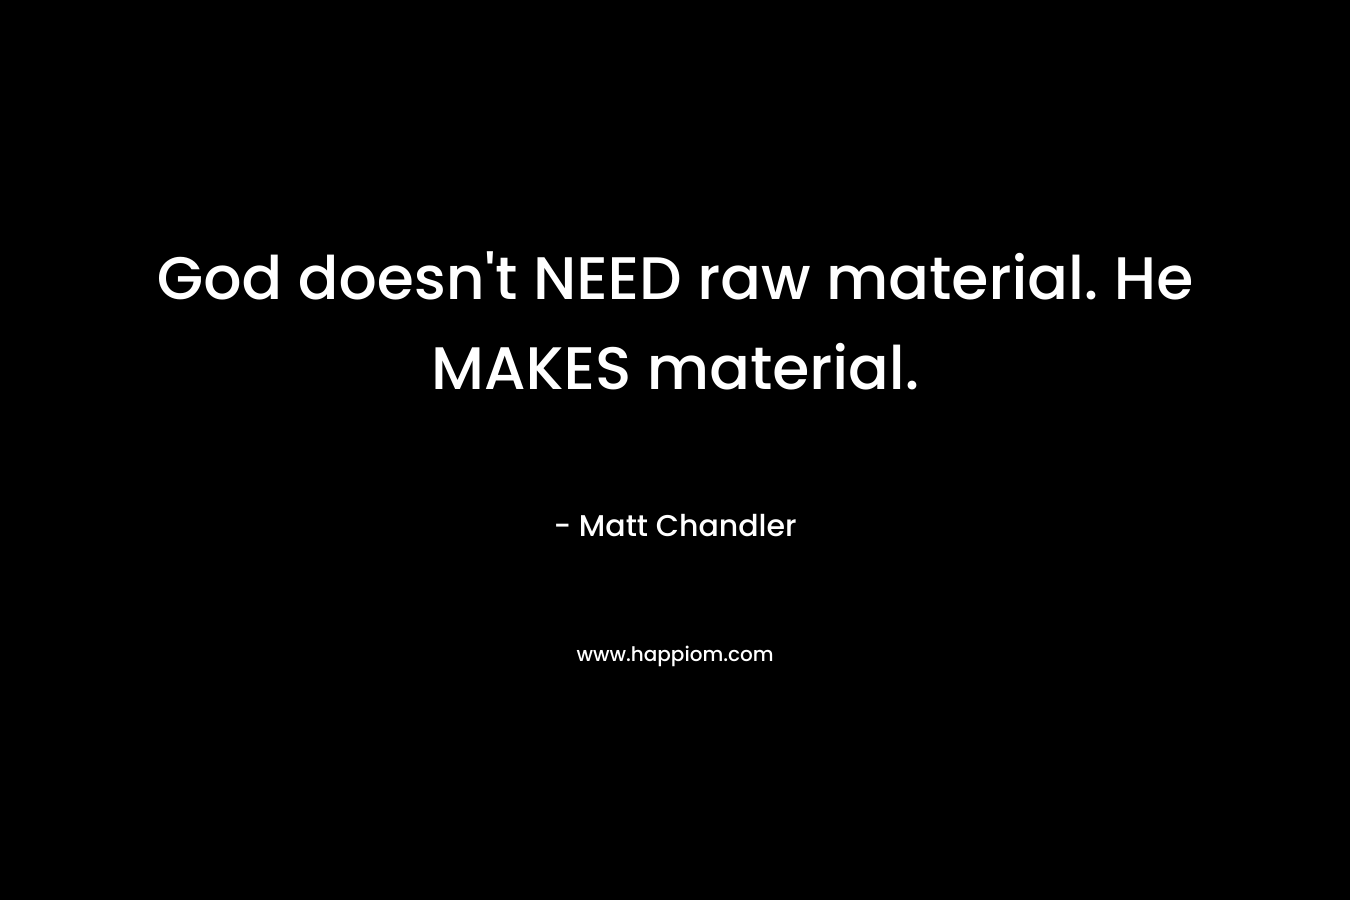 God doesn't NEED raw material. He MAKES material.